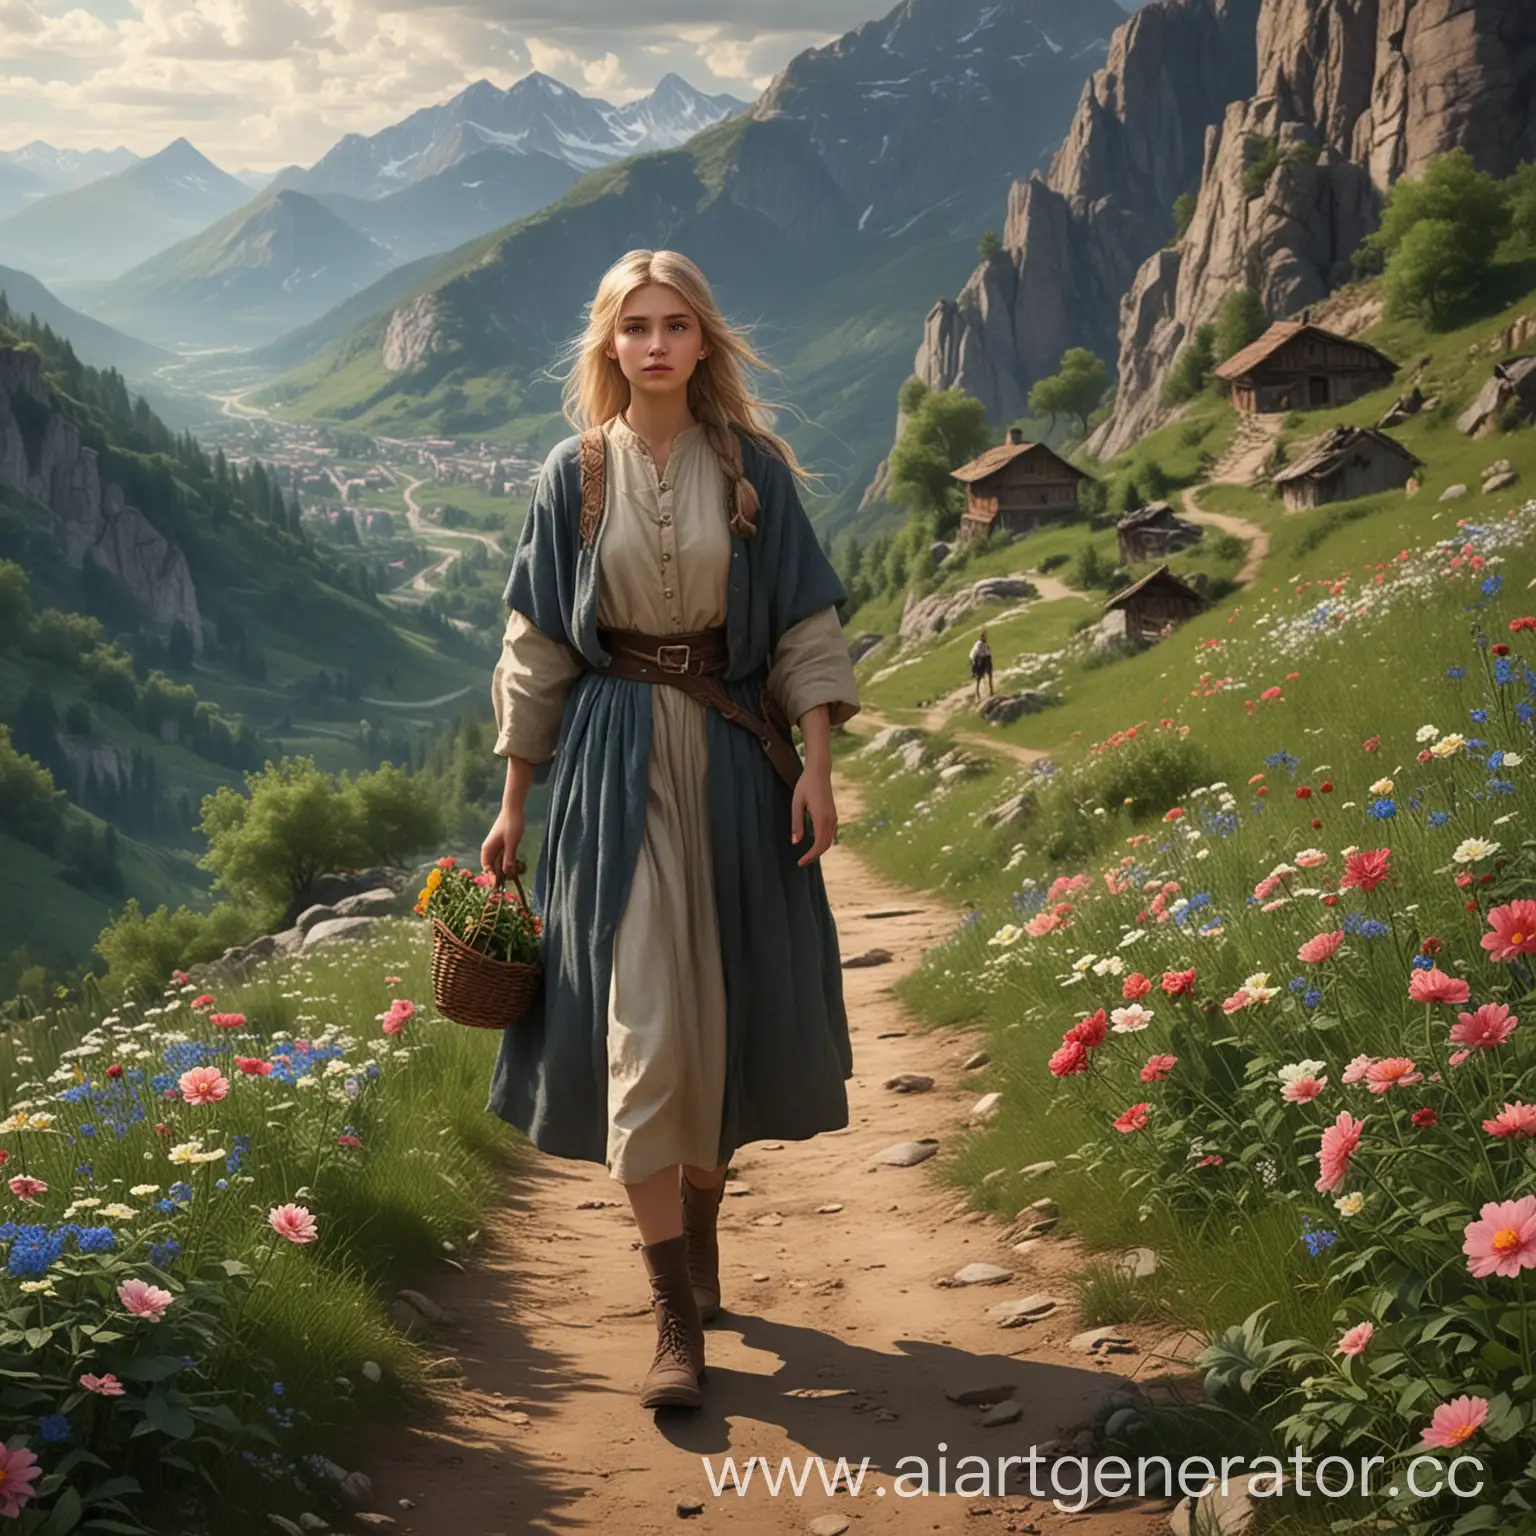 Brave-Princess-Embarks-on-Journey-to-Find-the-Flower-of-Happiness-atop-Mountain-Time